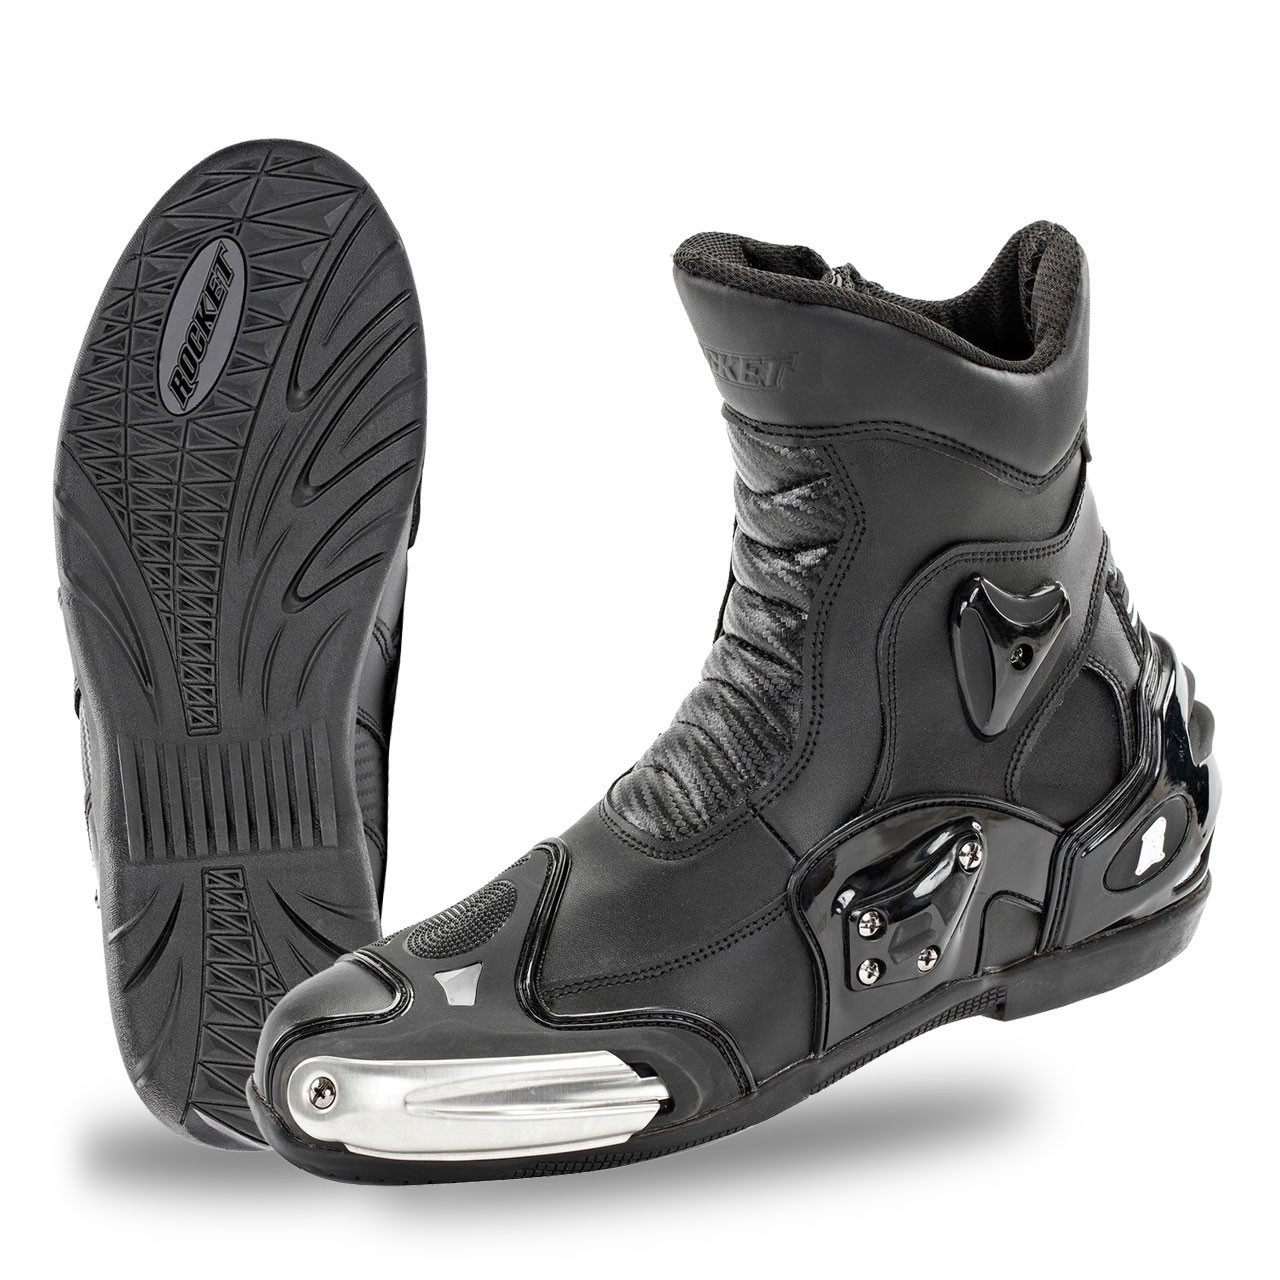 Best Boots for Riding a Motorcycle in Style and Safety - Team Motorcycle